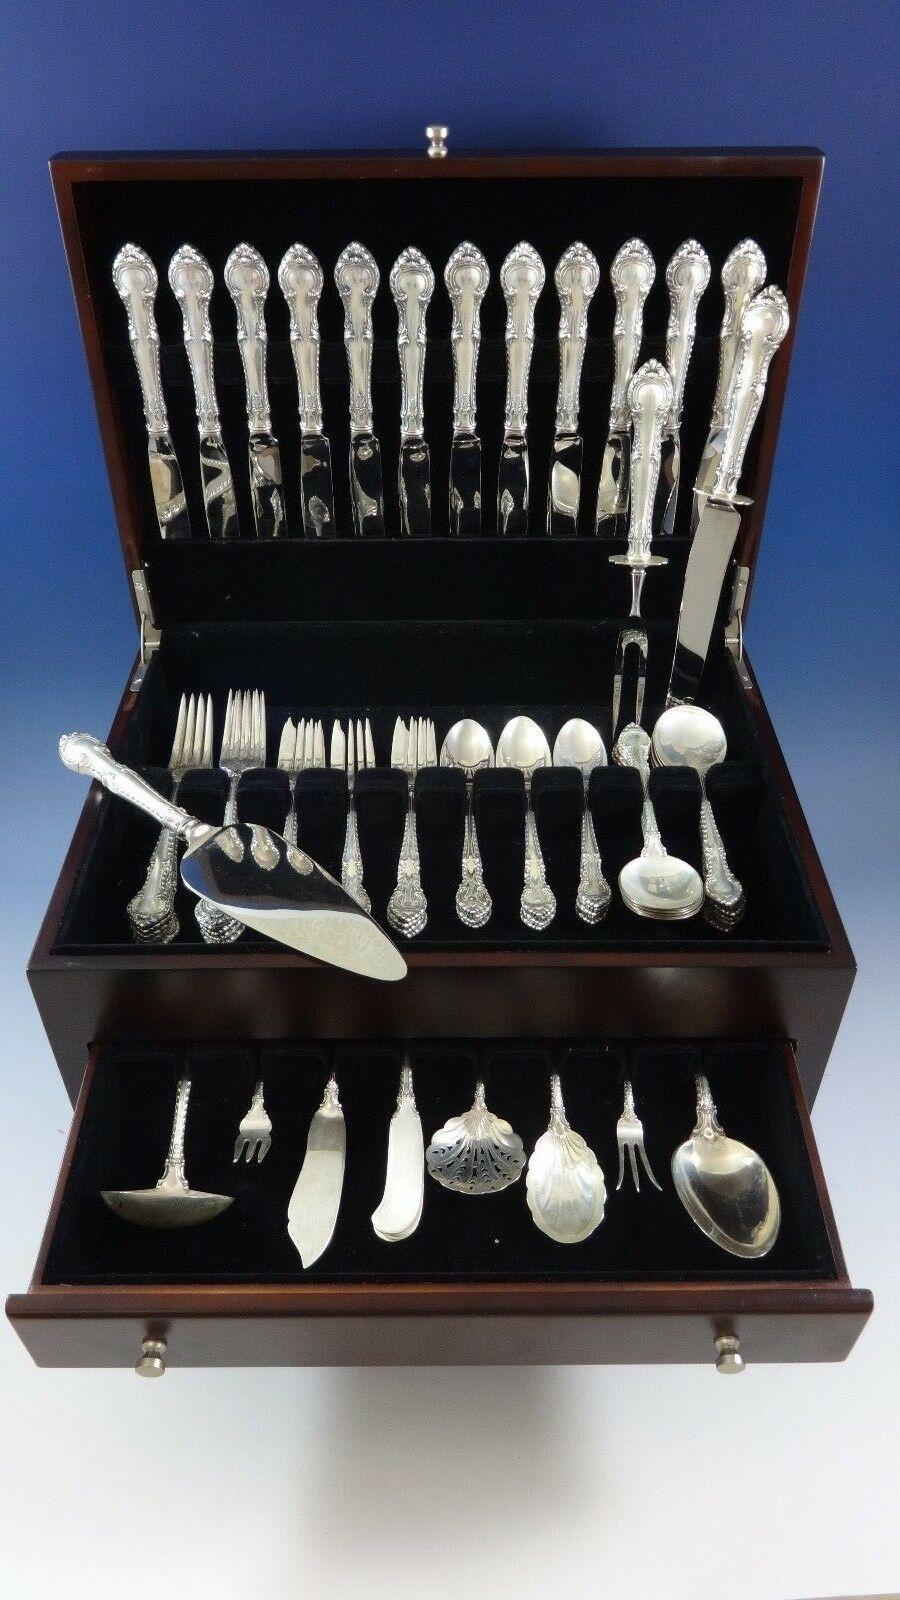 English Gadroon by Gorham sterling silver flatware set - 82 Pieces. This set includes:

12 knives, 8 3/4